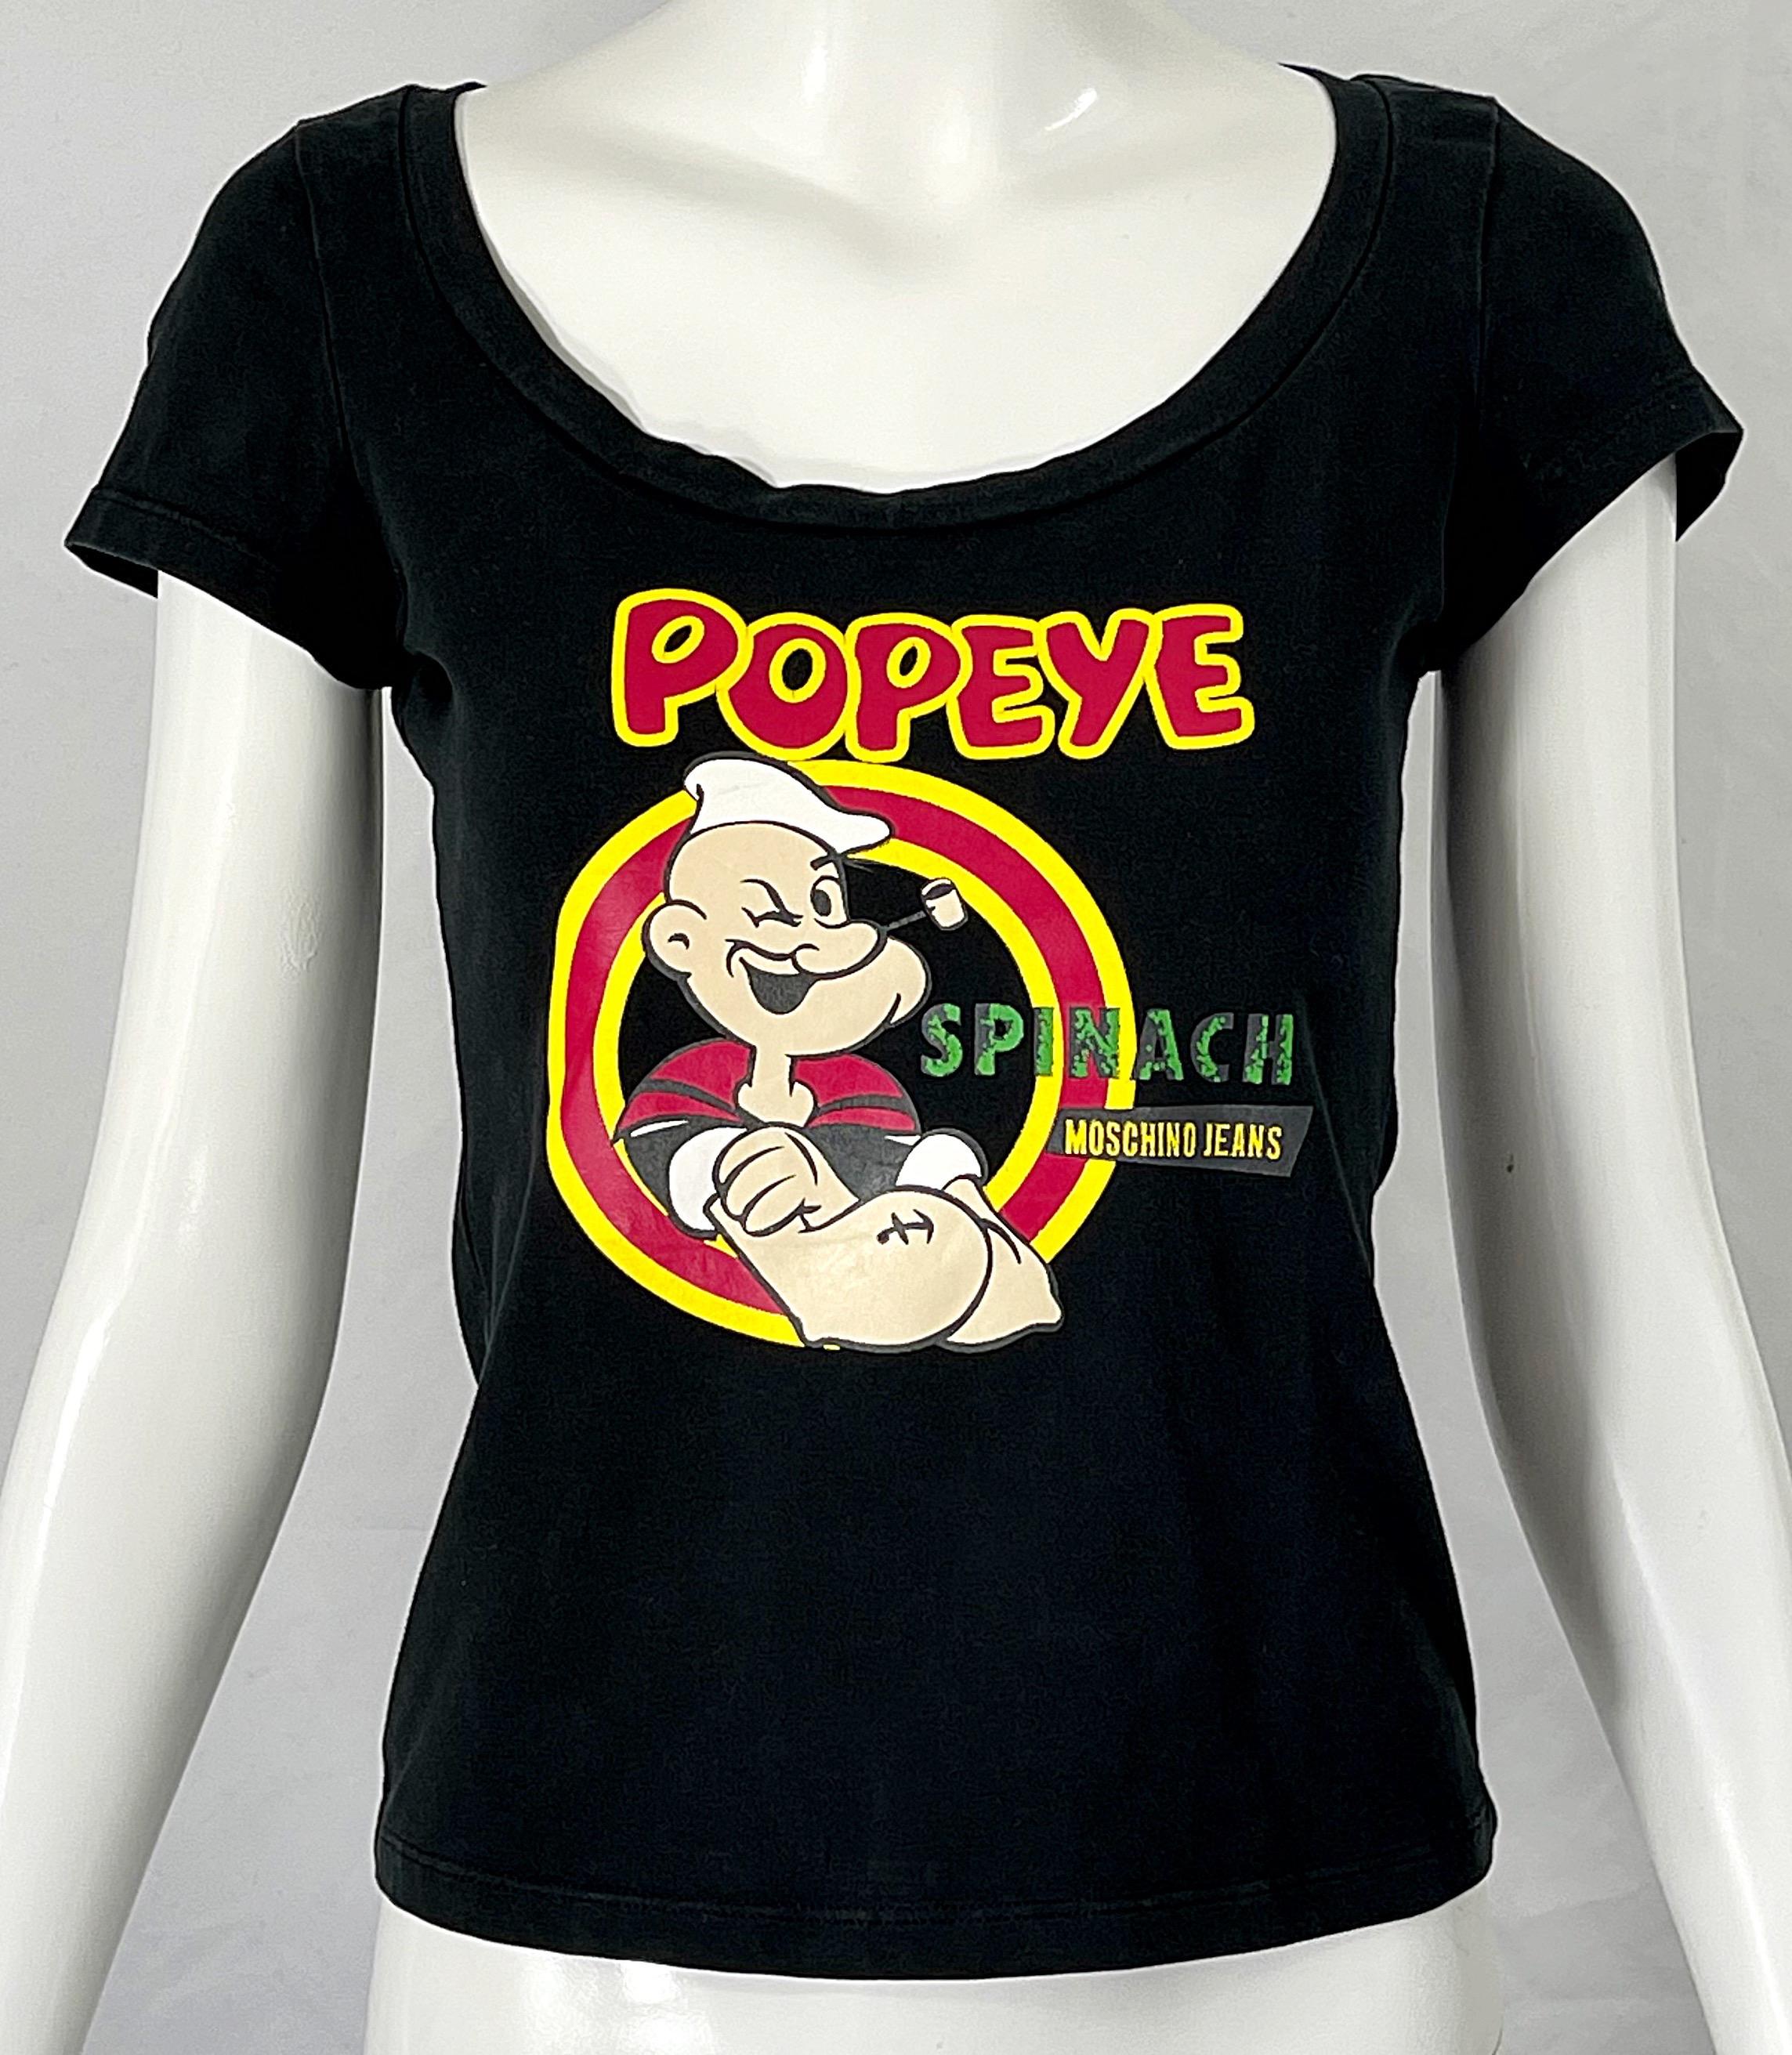 Women's Moschino Jeans Popeye the Sailor Man Novelty Print Vintage 90s Tee Shirt Spinach